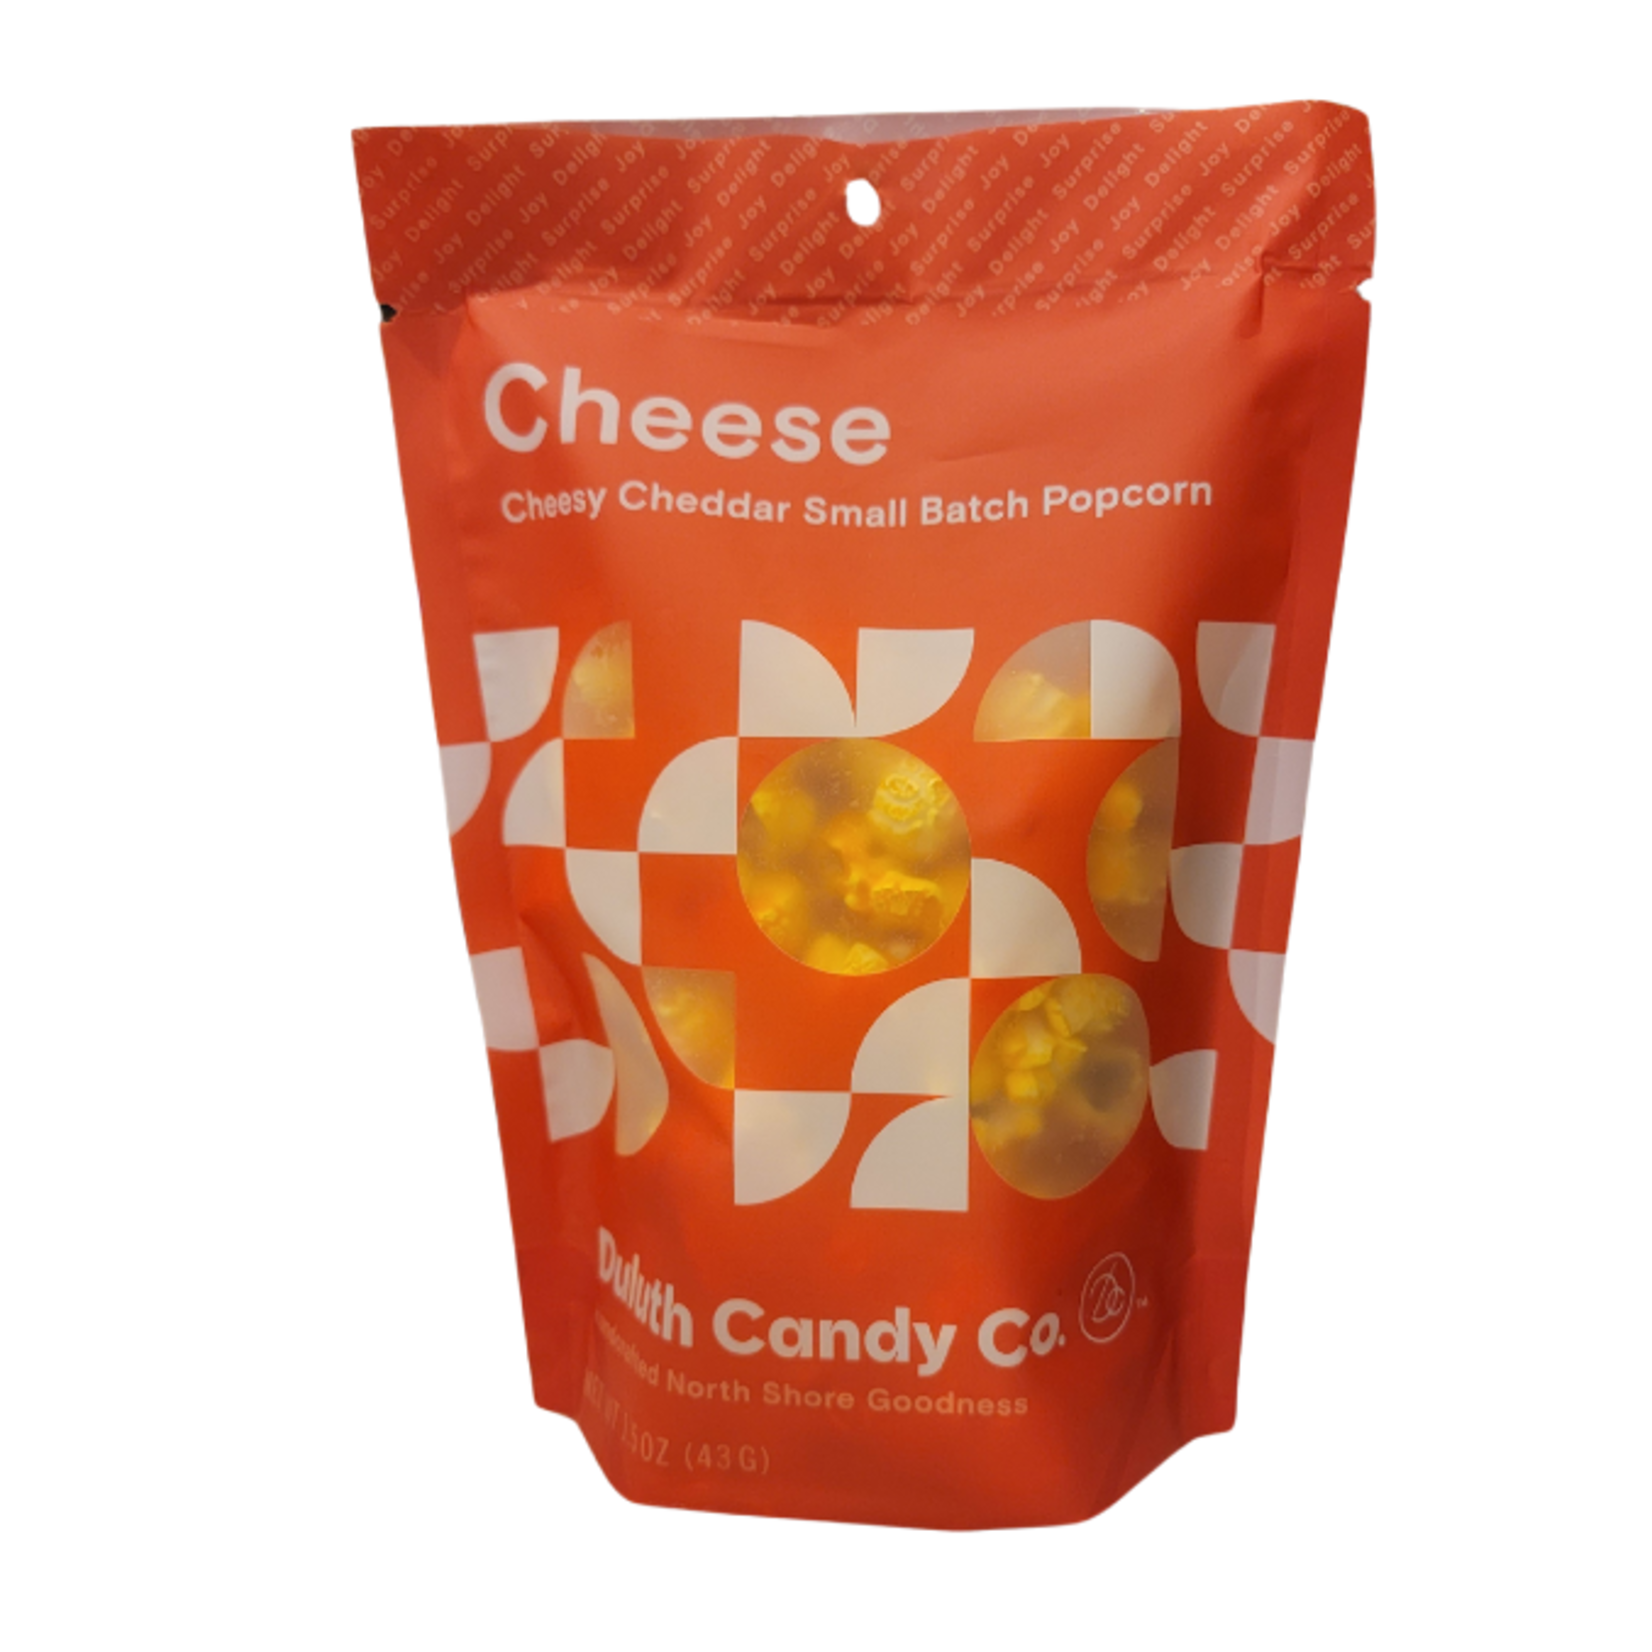 Duluth Candy Co. Cheese Popcorn 5oz - Duluth Candy Co